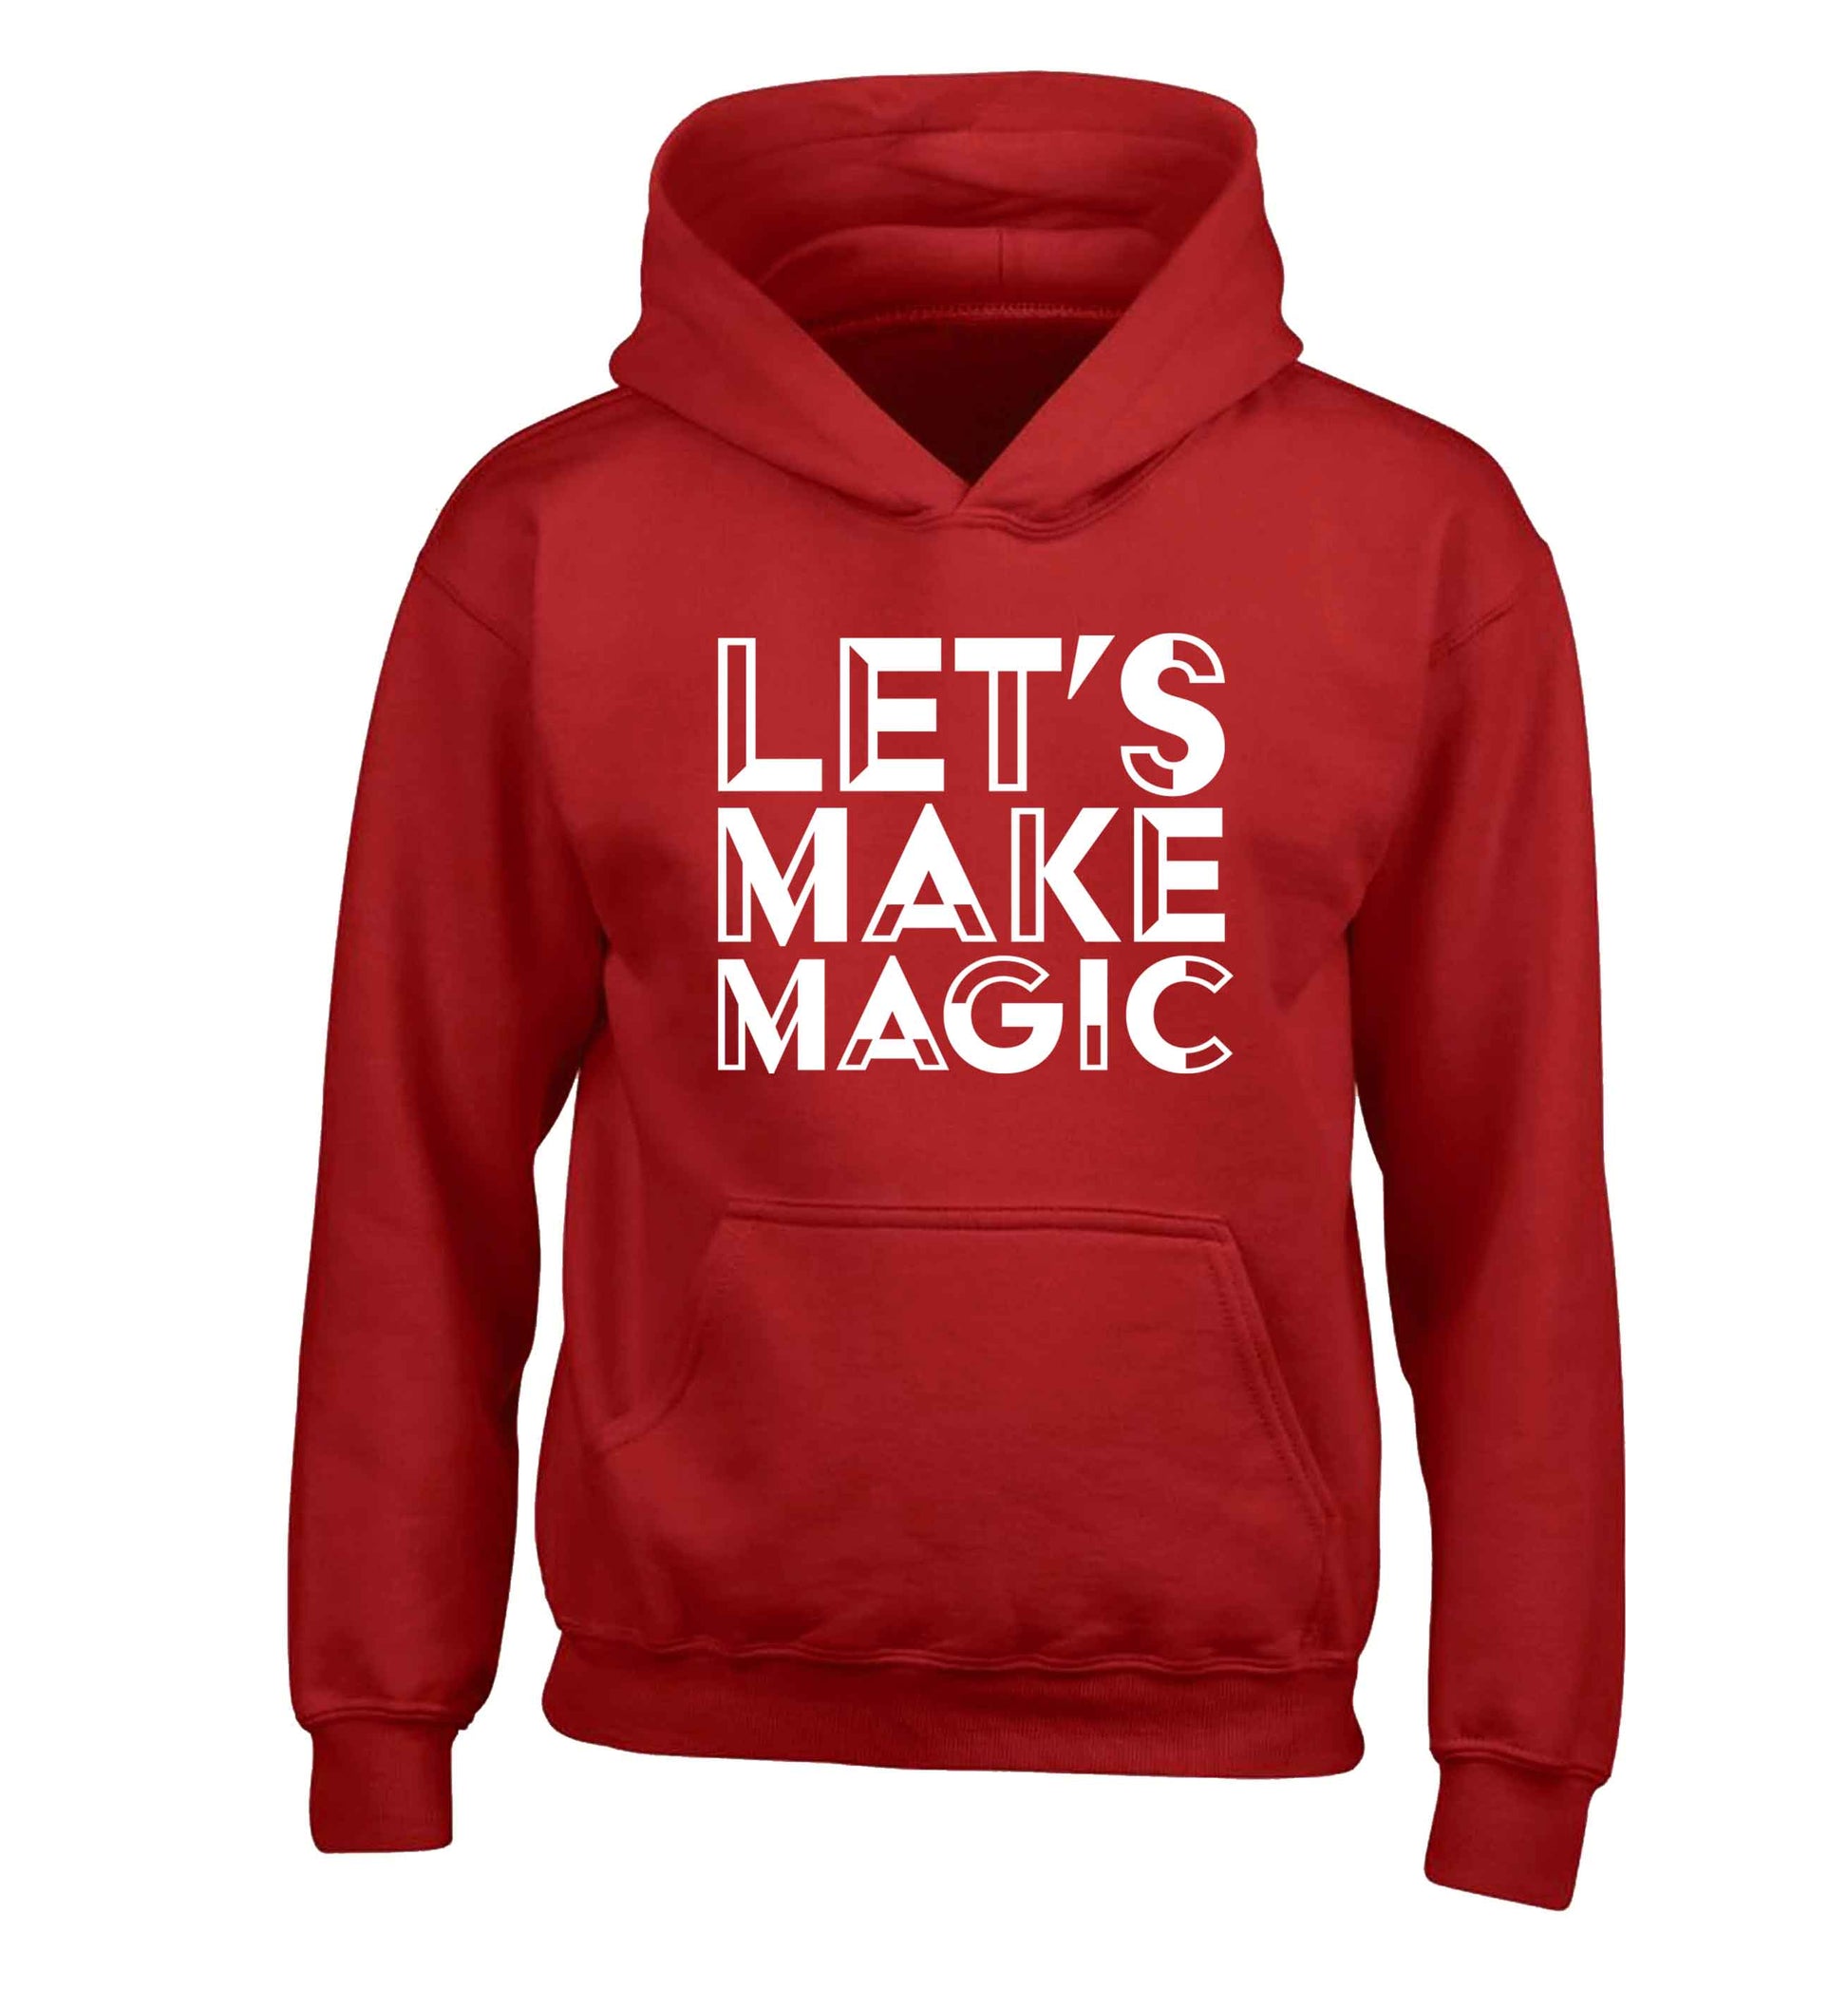 Let's make magic children's red hoodie 12-13 Years